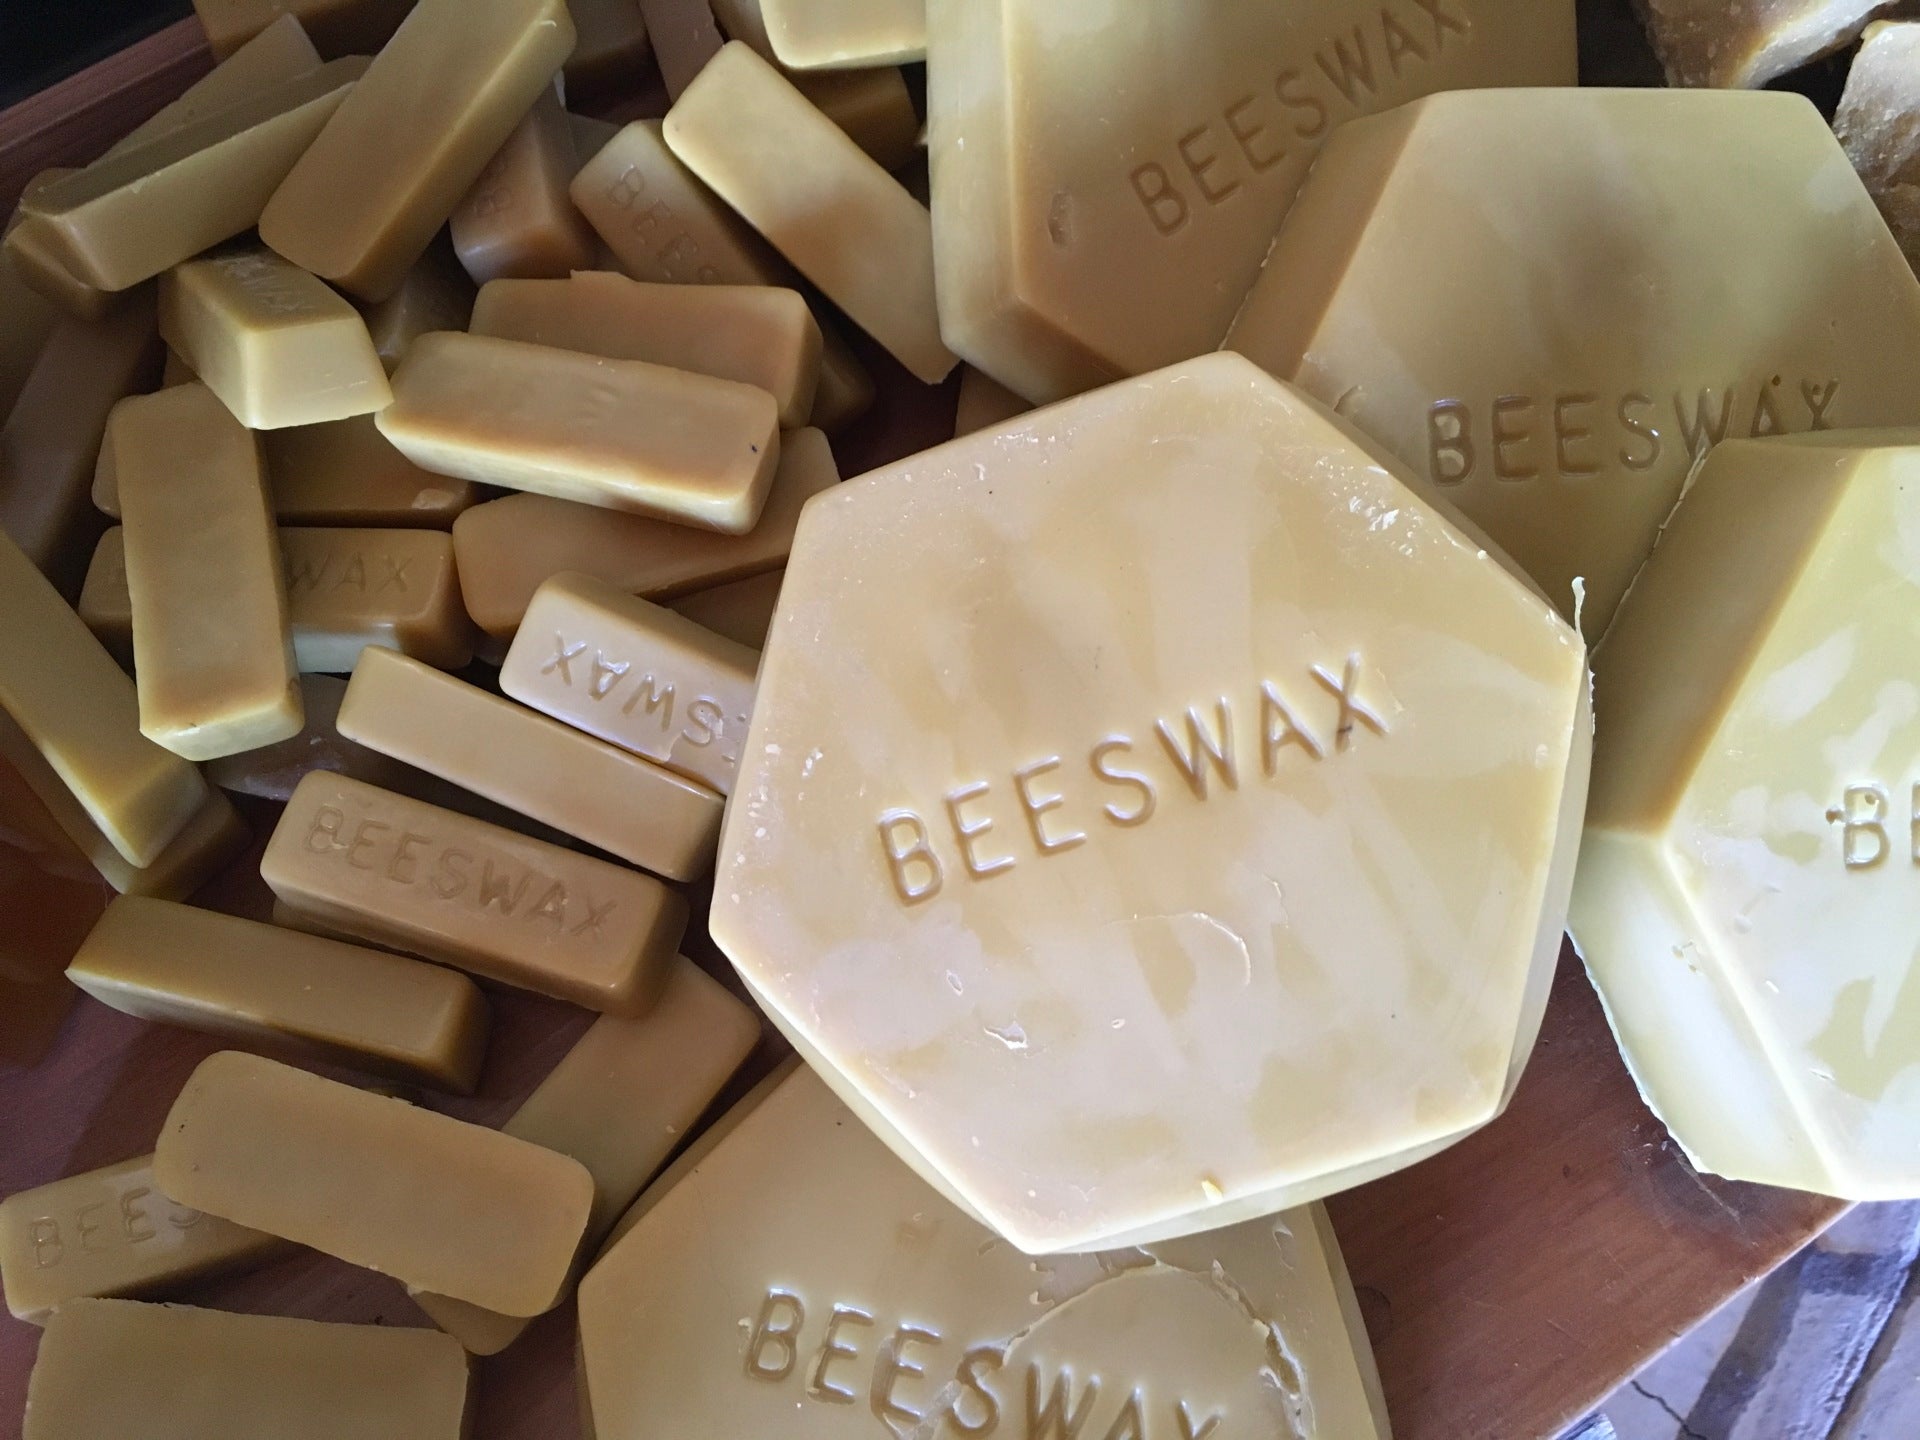 Beeswax Sunscreen + Bug repellant – Farm and Hive